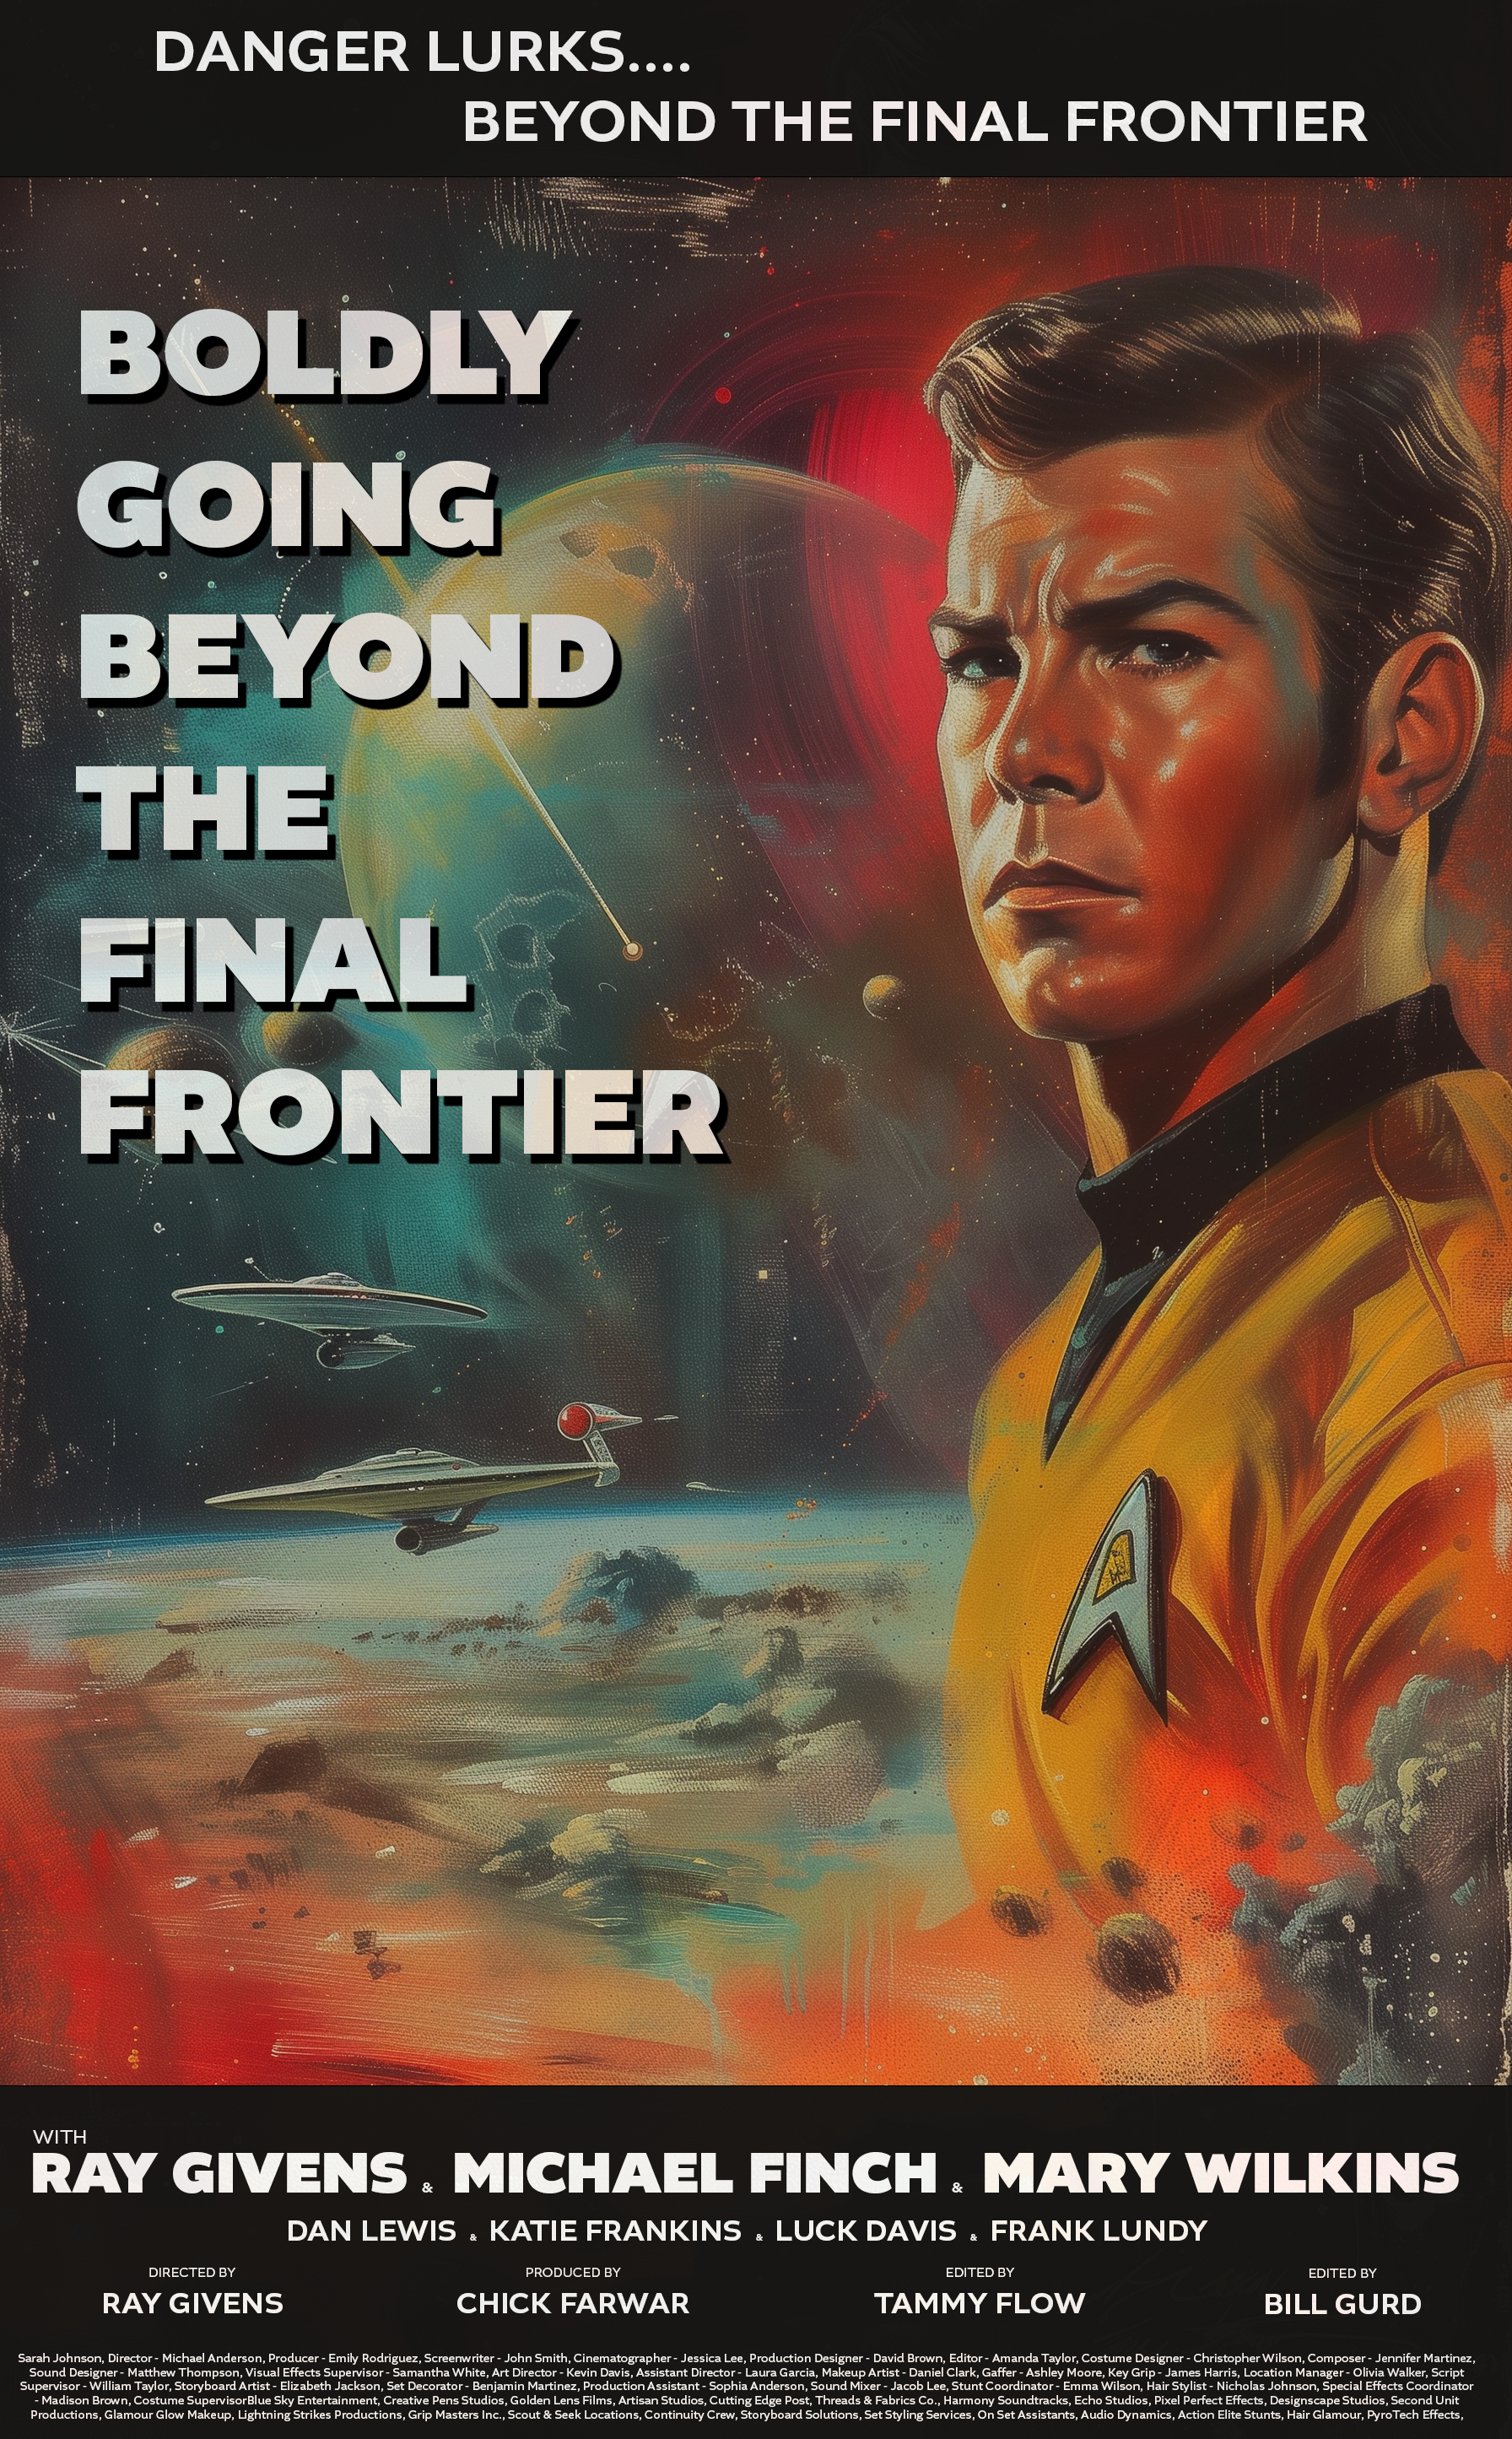 Name:  Beyond the Final Frontier.png
Views: 130
Size:  8.19 MB